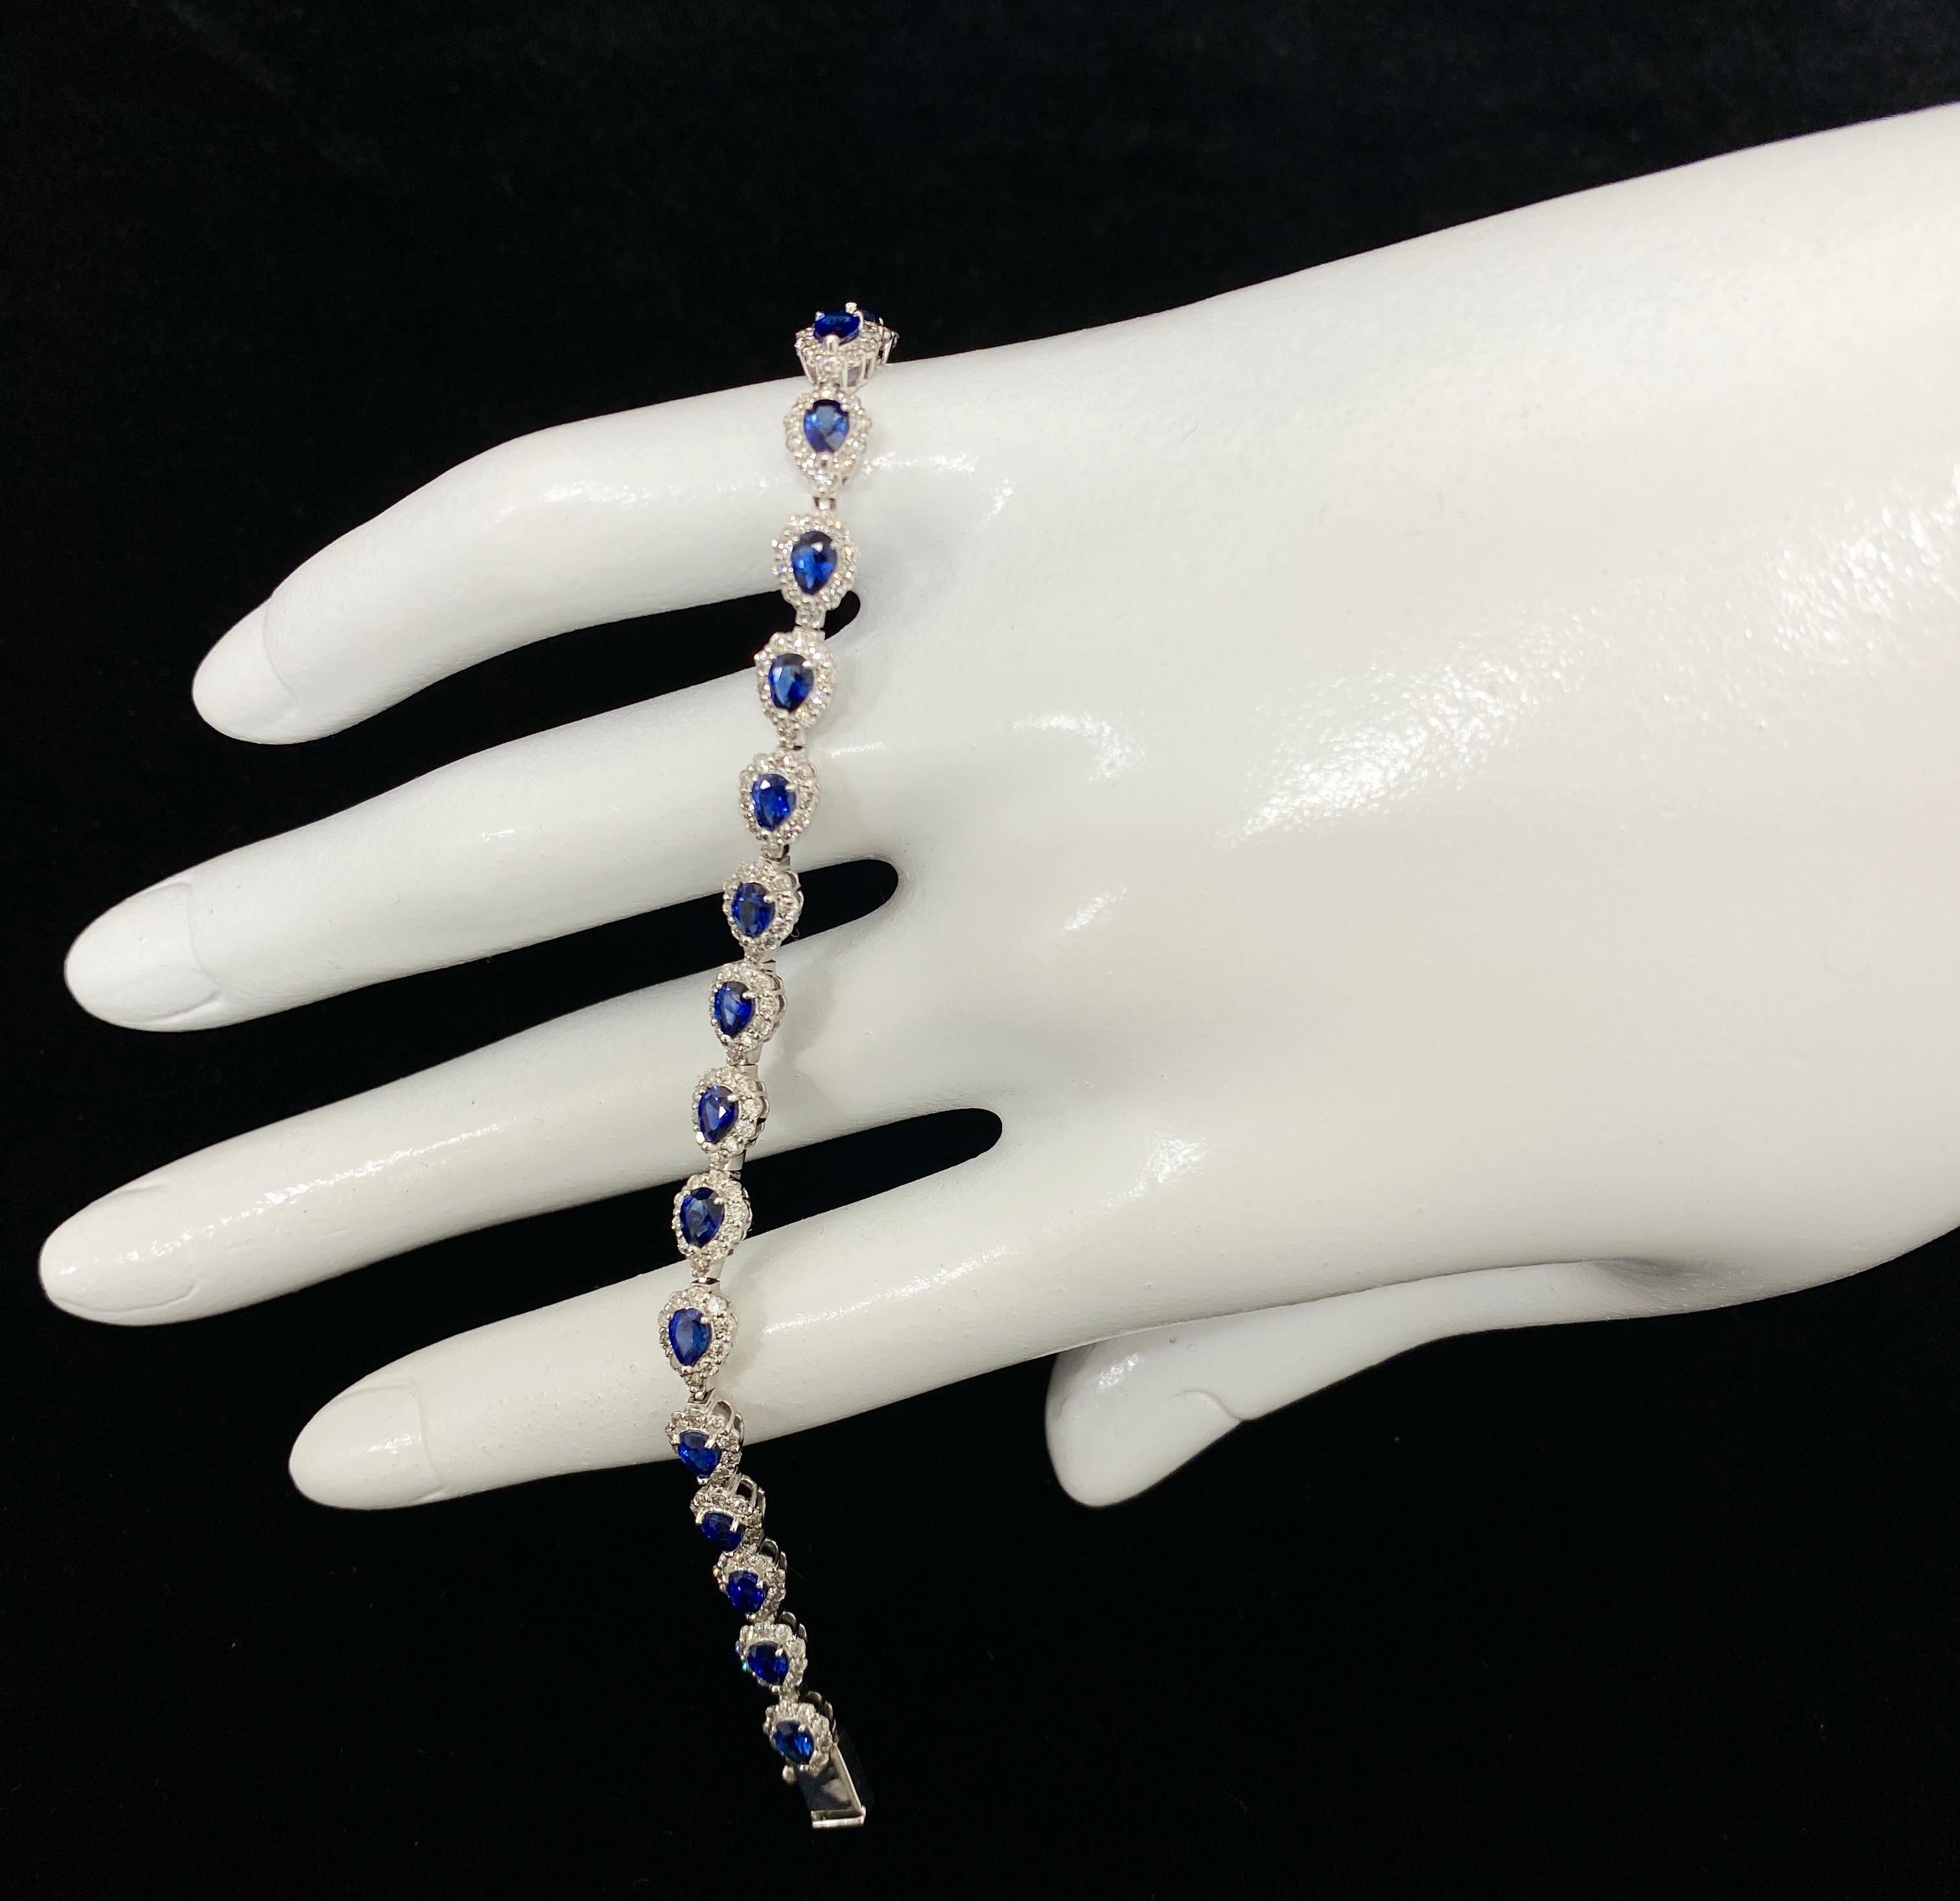 A beautiful Tennis Bracelet featuring a total of 3.91 Carats of Natural Sapphires and 1.91 Carats of Diamond Accents set in Platinum. The Sapphires are of 4x3mm size. Sapphires have extraordinary durability - they excel in hardness as well as